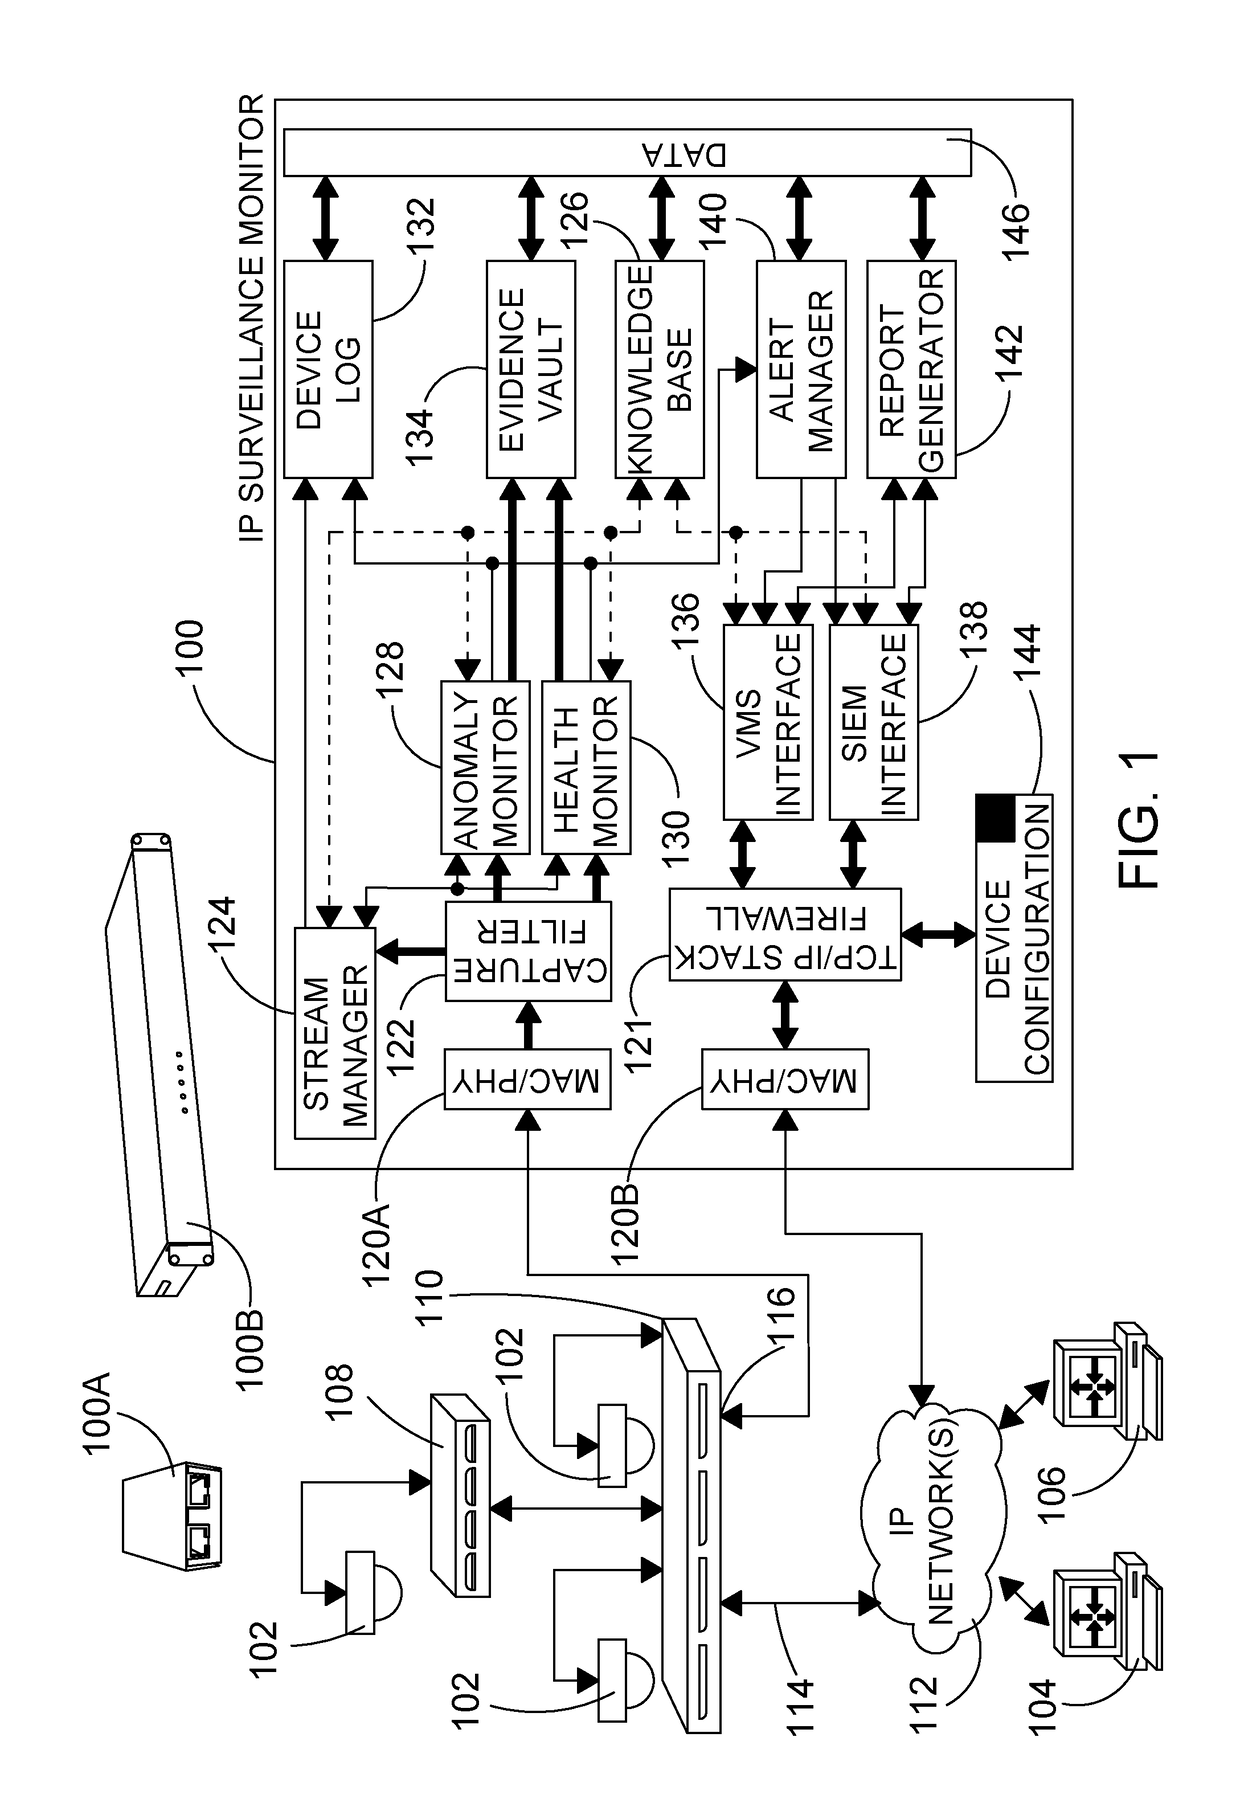 Monitoring devices and methods for IP surveillance networks